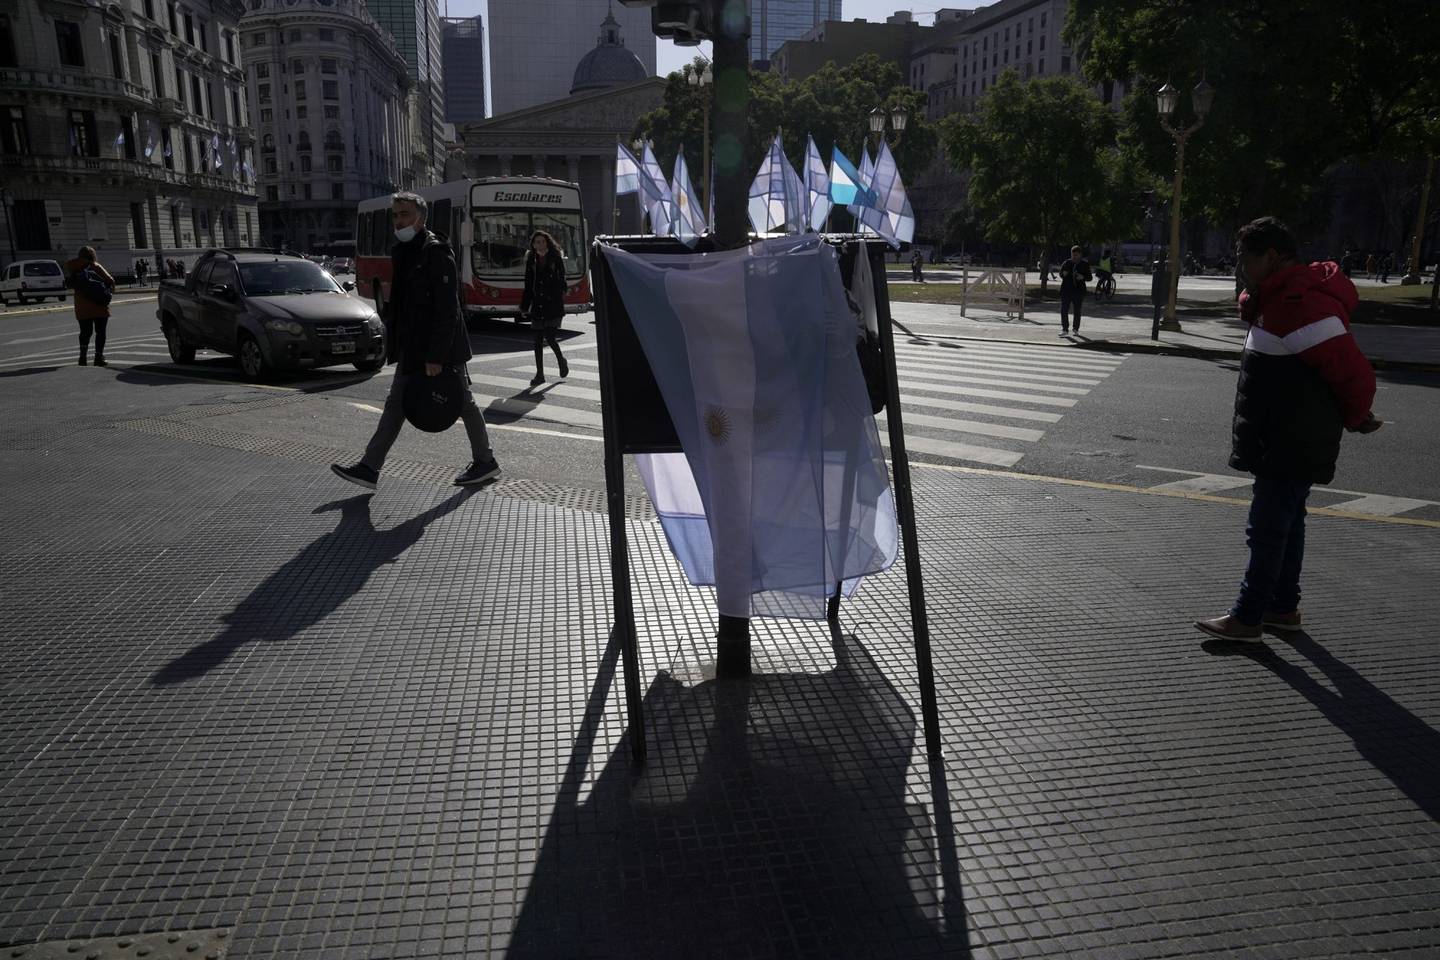 A street vendor sells Argentinian flags in Buenos Aires downtown, Argentina.